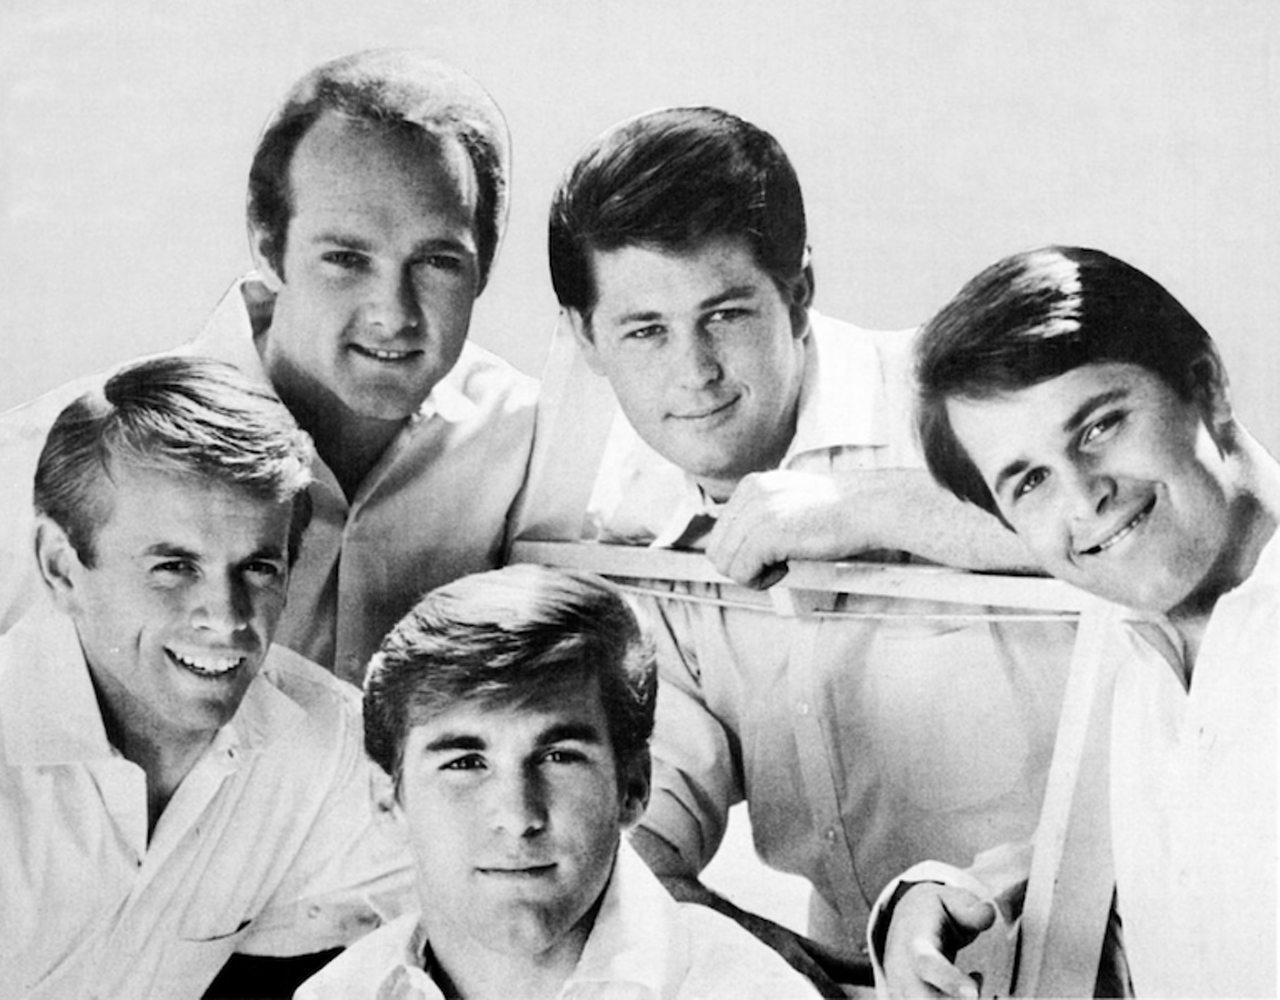 The Beach Boys &#151; &#147;Sloop John B&#148;
Rum is never directly referenced in this song, but what else are you gonna drink when you&#146;re with the first mate and captain while drinking all night in Nassau town?
Photo via Capitol Records